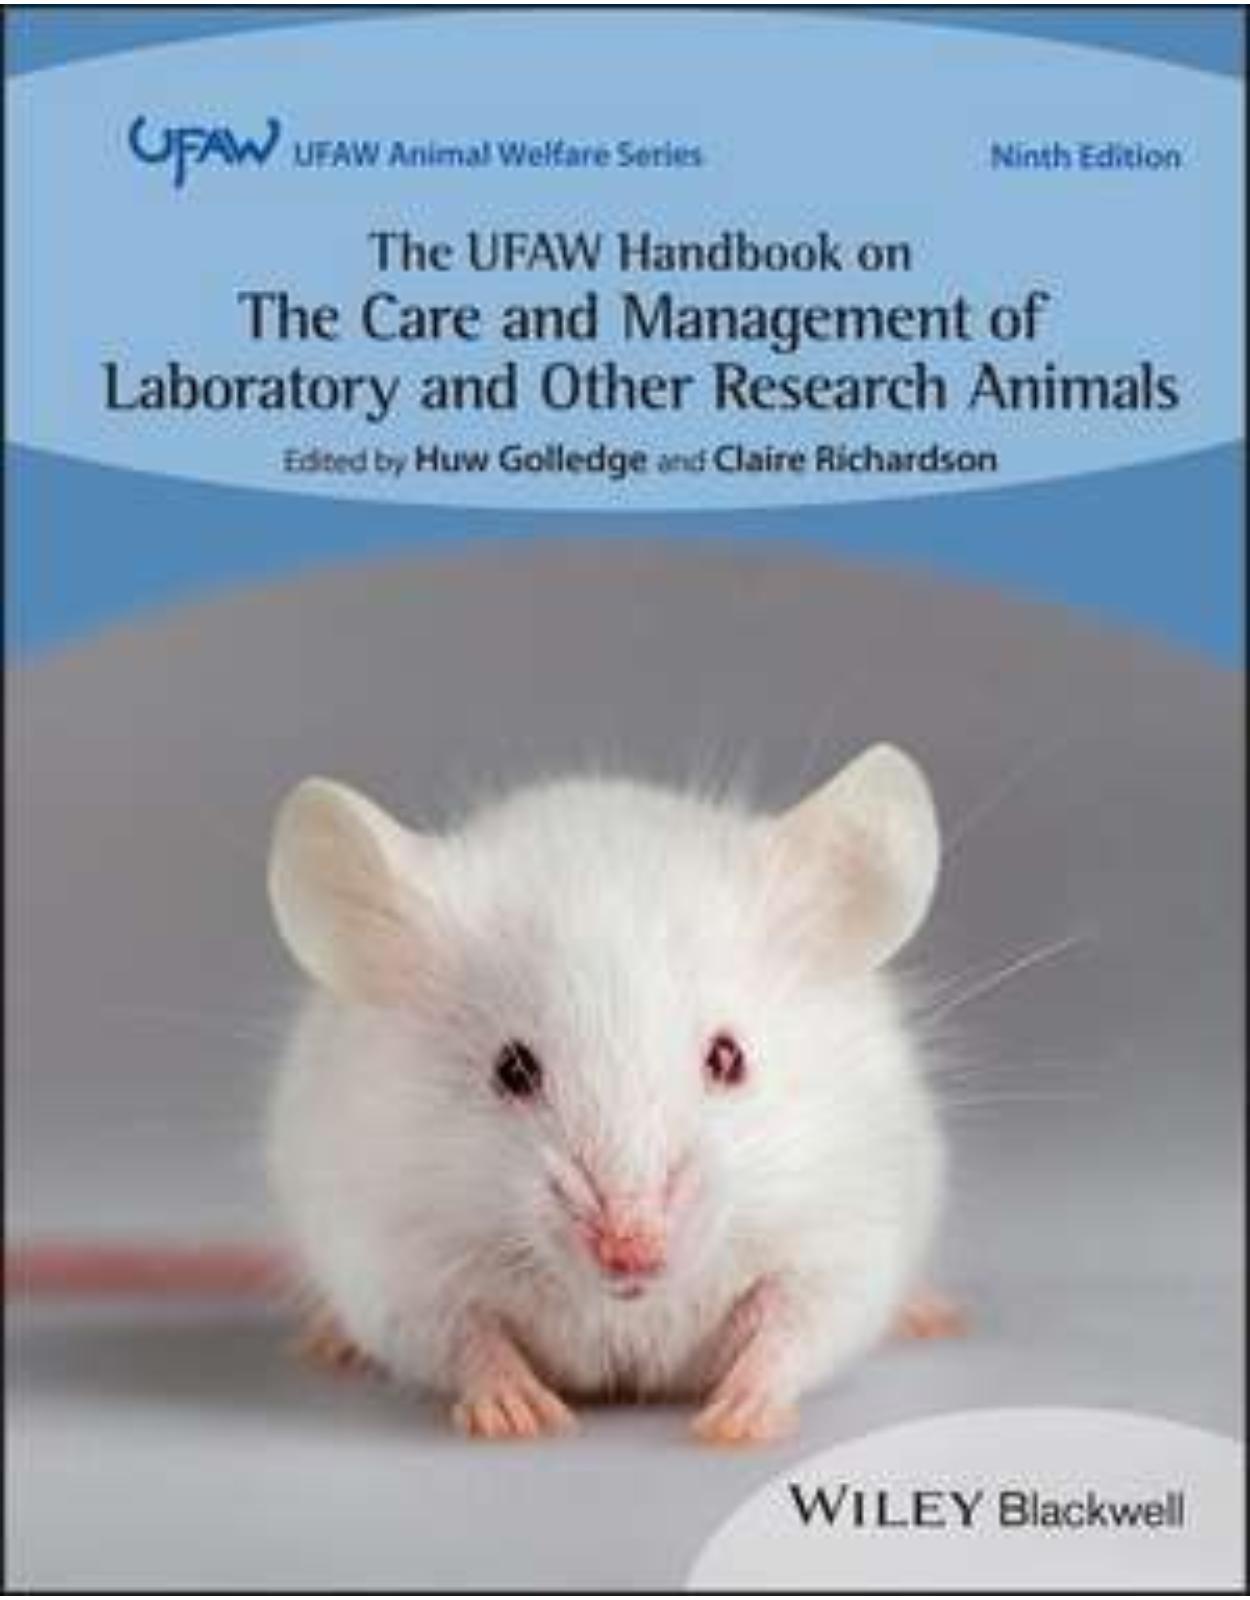 The UFAW Handbook on the Care and Management of La boratory and Other Research Animals, 9th Edition